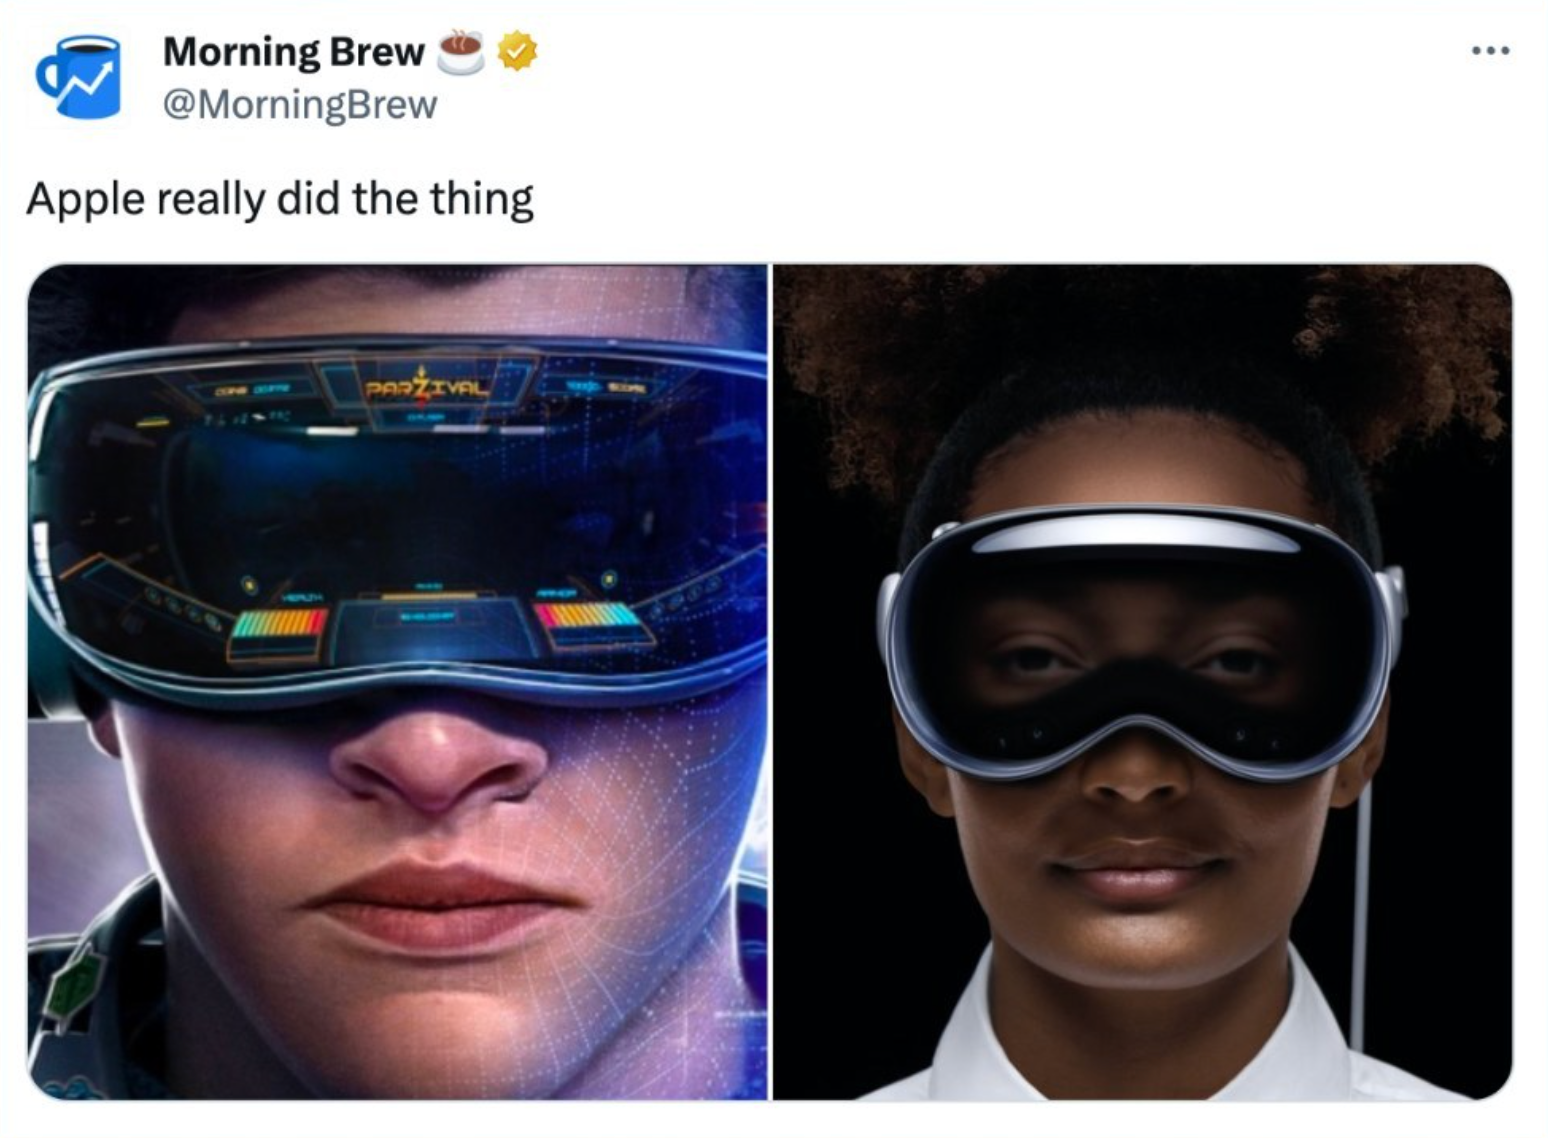 Apple Really Did The Thing With the Vision Pro Augmented Reality Headset